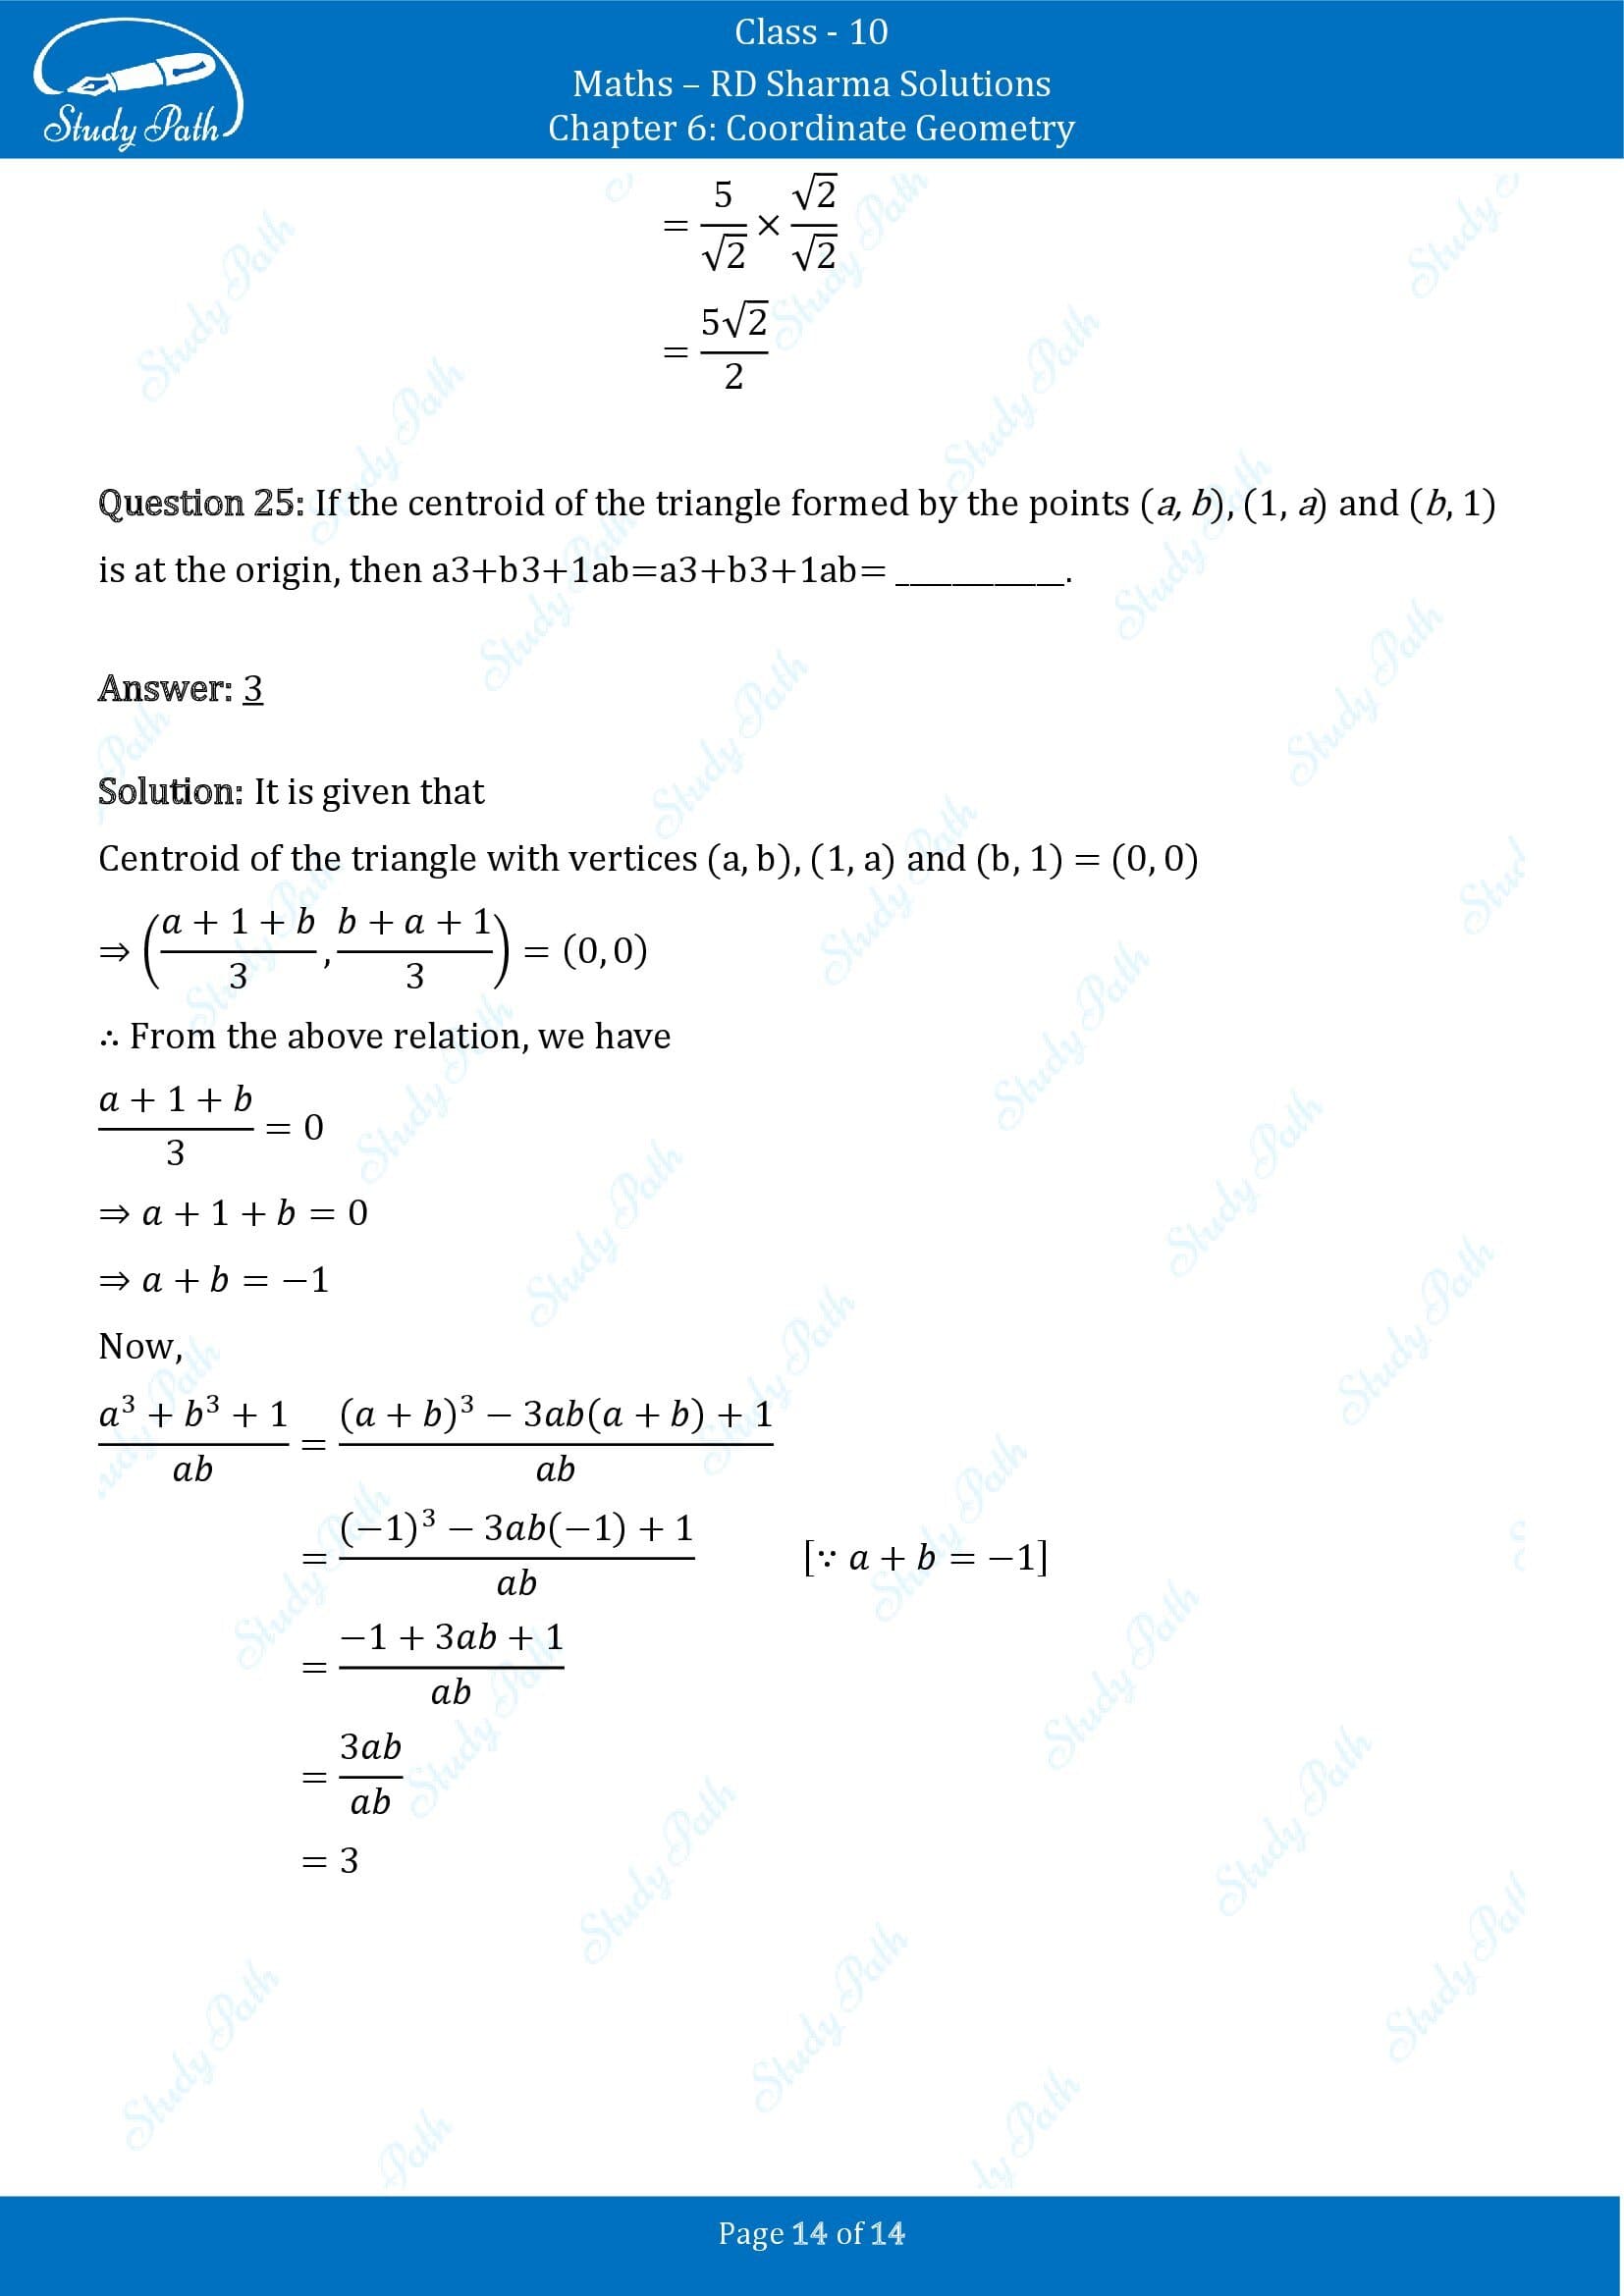 RD Sharma Solutions Class 10 Chapter 6 Coordinate Geometry Fill in the Blank Type Questions FBQs 00014